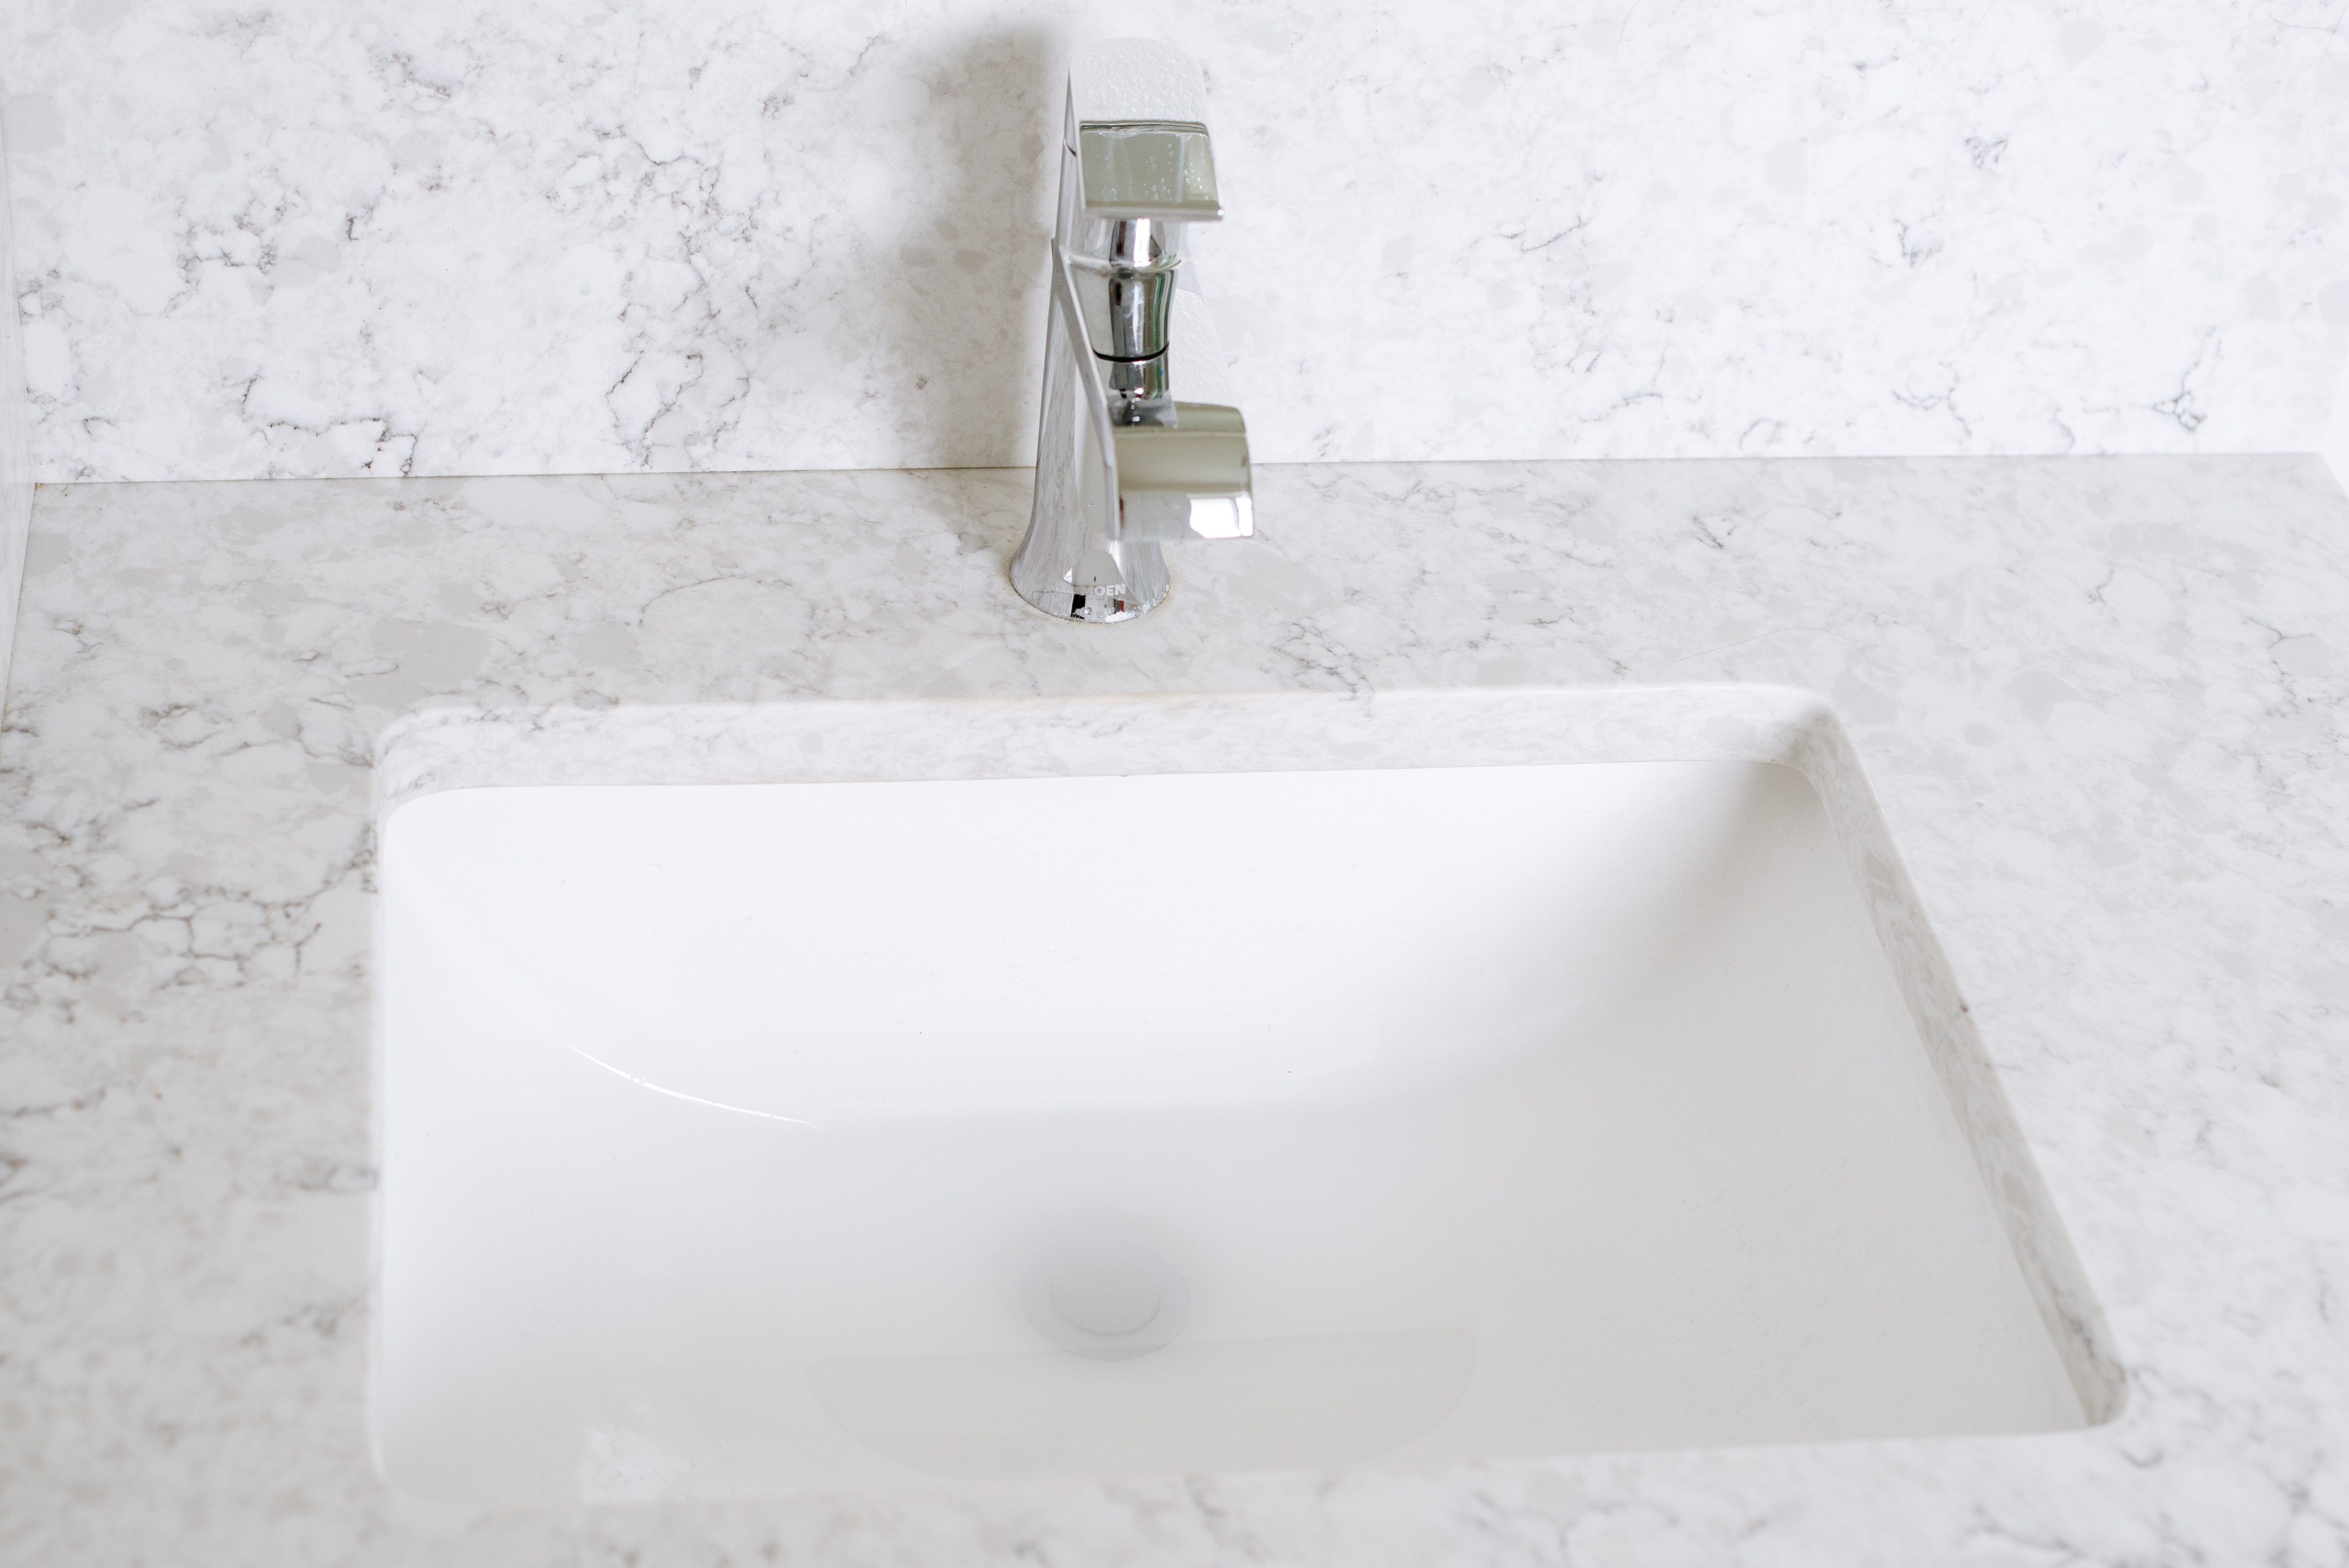 5 Easy Ways to Fix a Slow Draining Sink